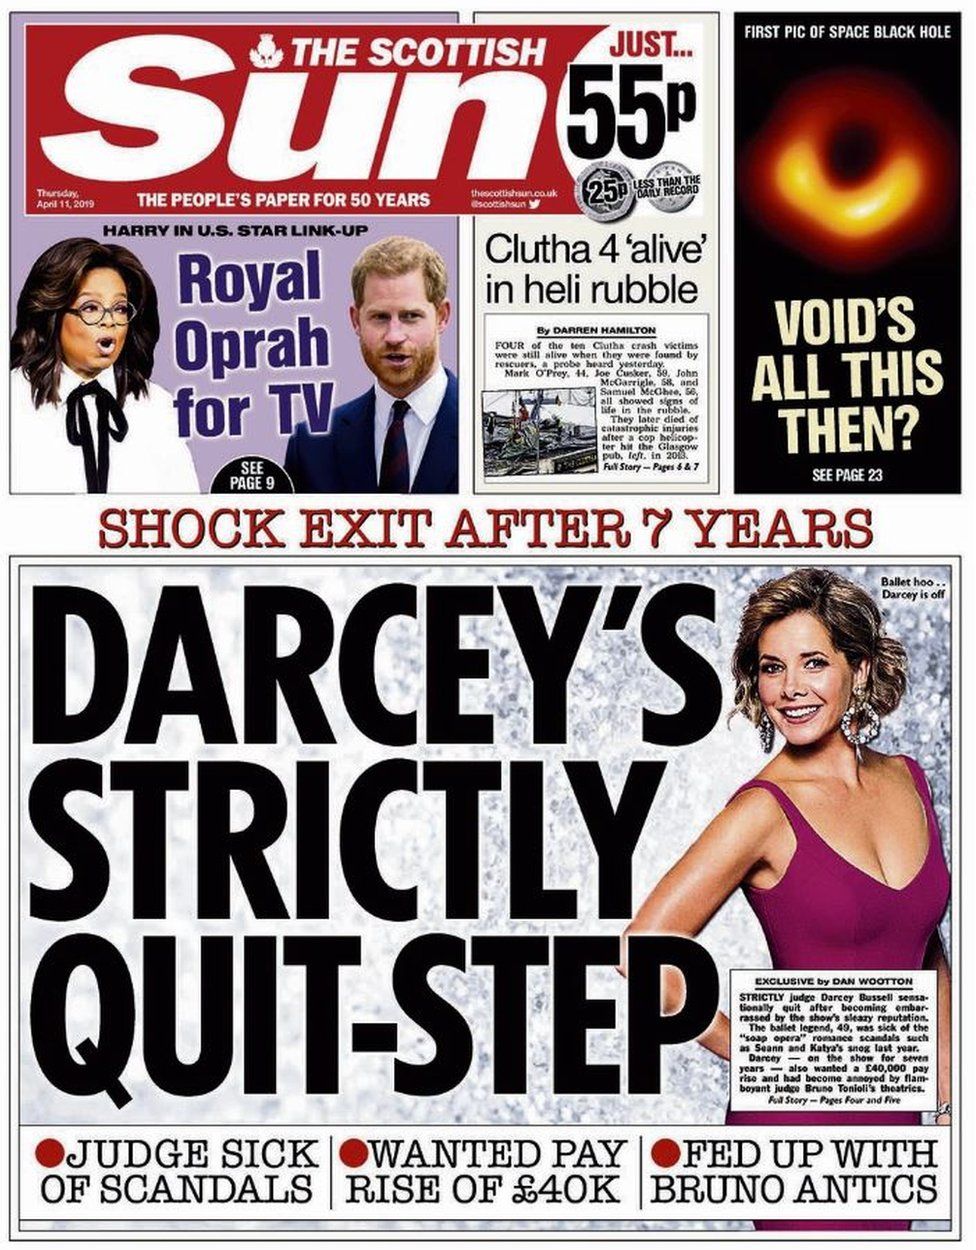 Scotland's papers: Brexit 'Halloween nightmare' and Darcey quits - BBC News